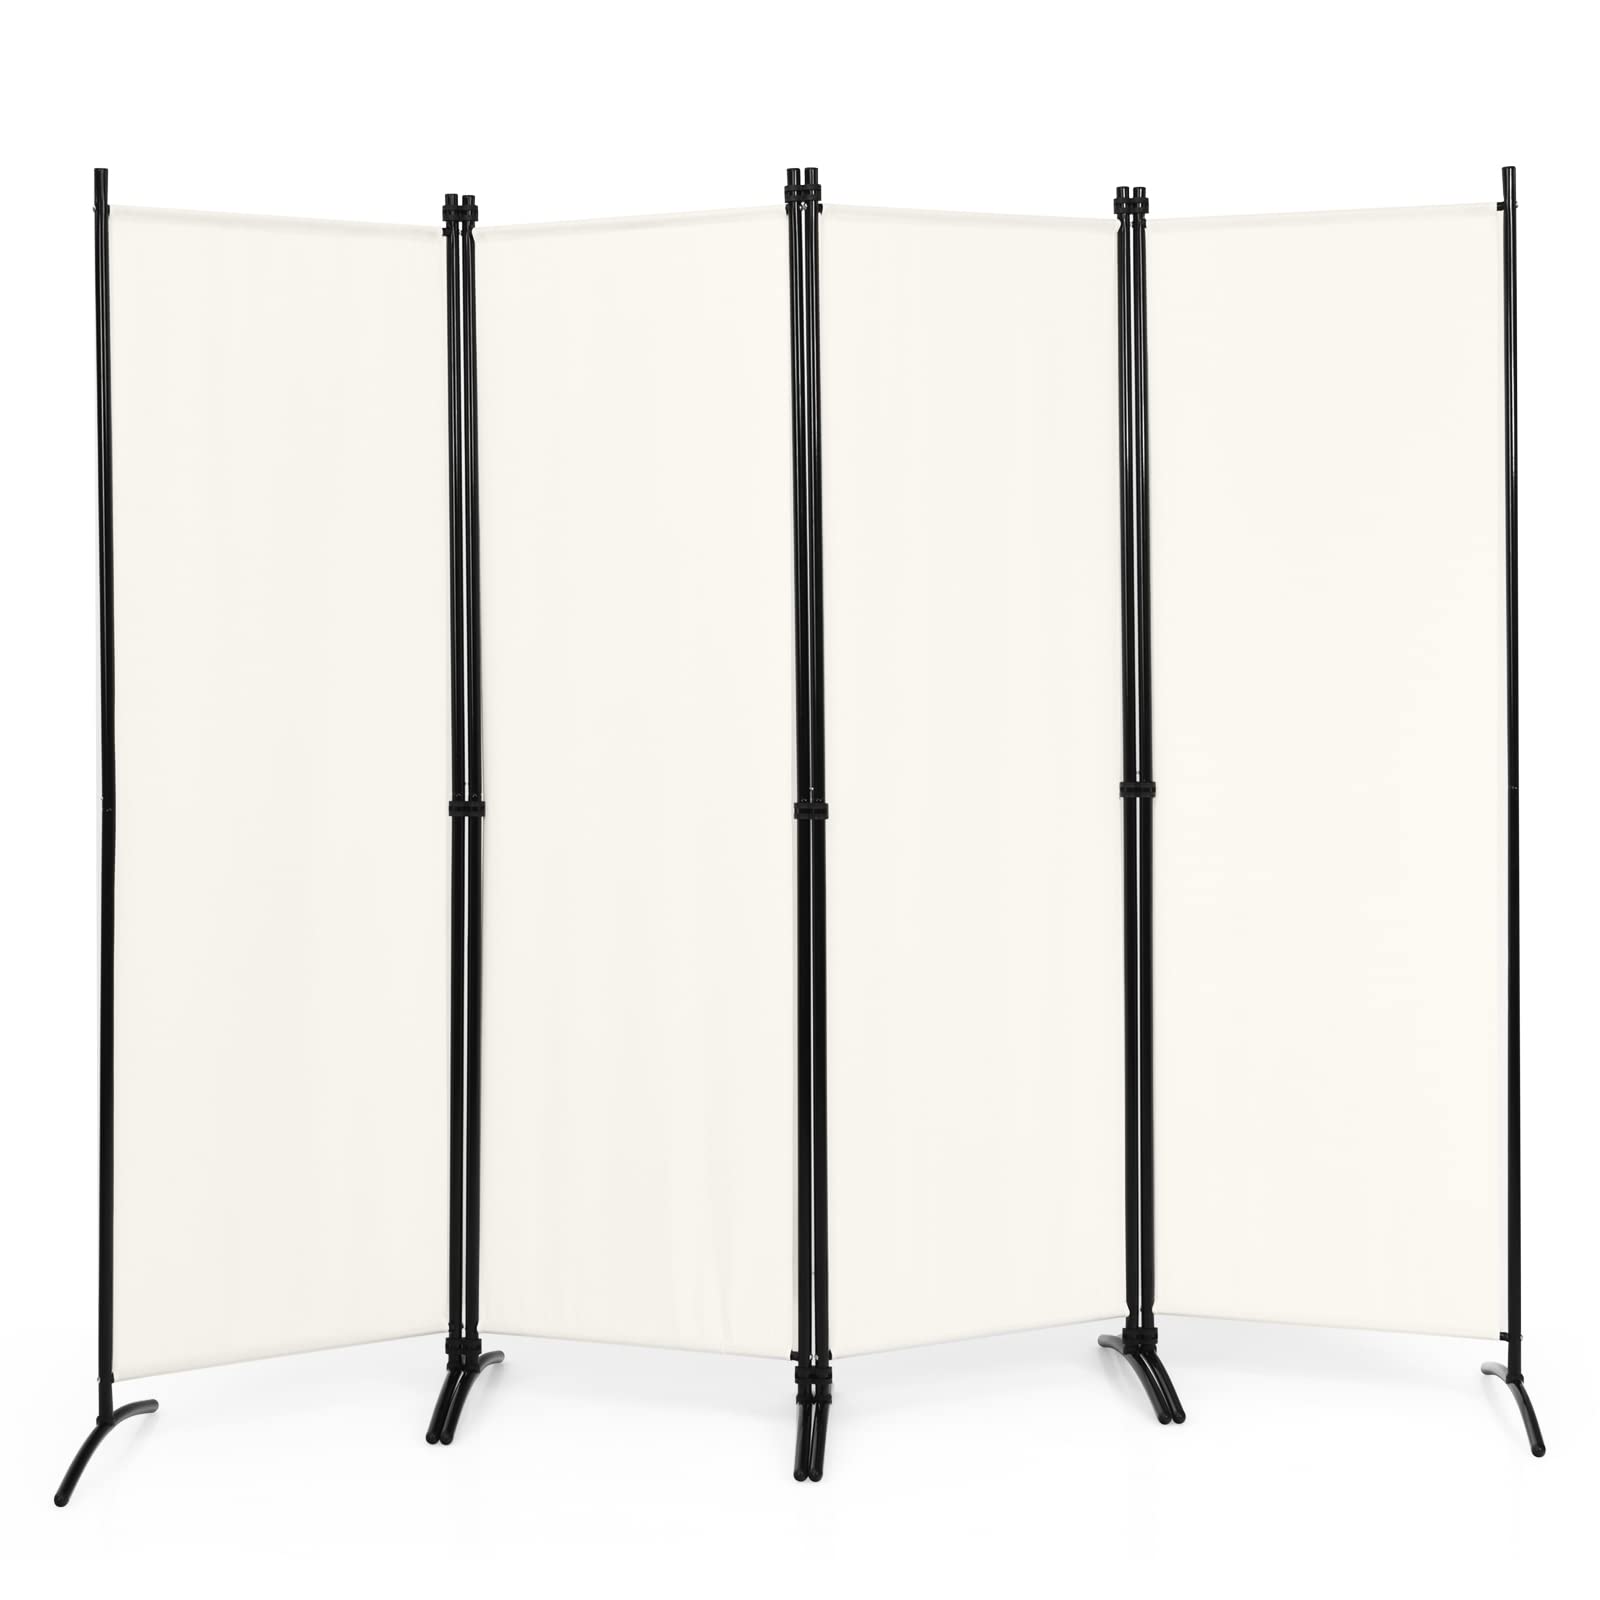 Giantex 4 Panel Room Divider, 5.6Ft Folding Screen, Home Office Freestanding Tall Partition